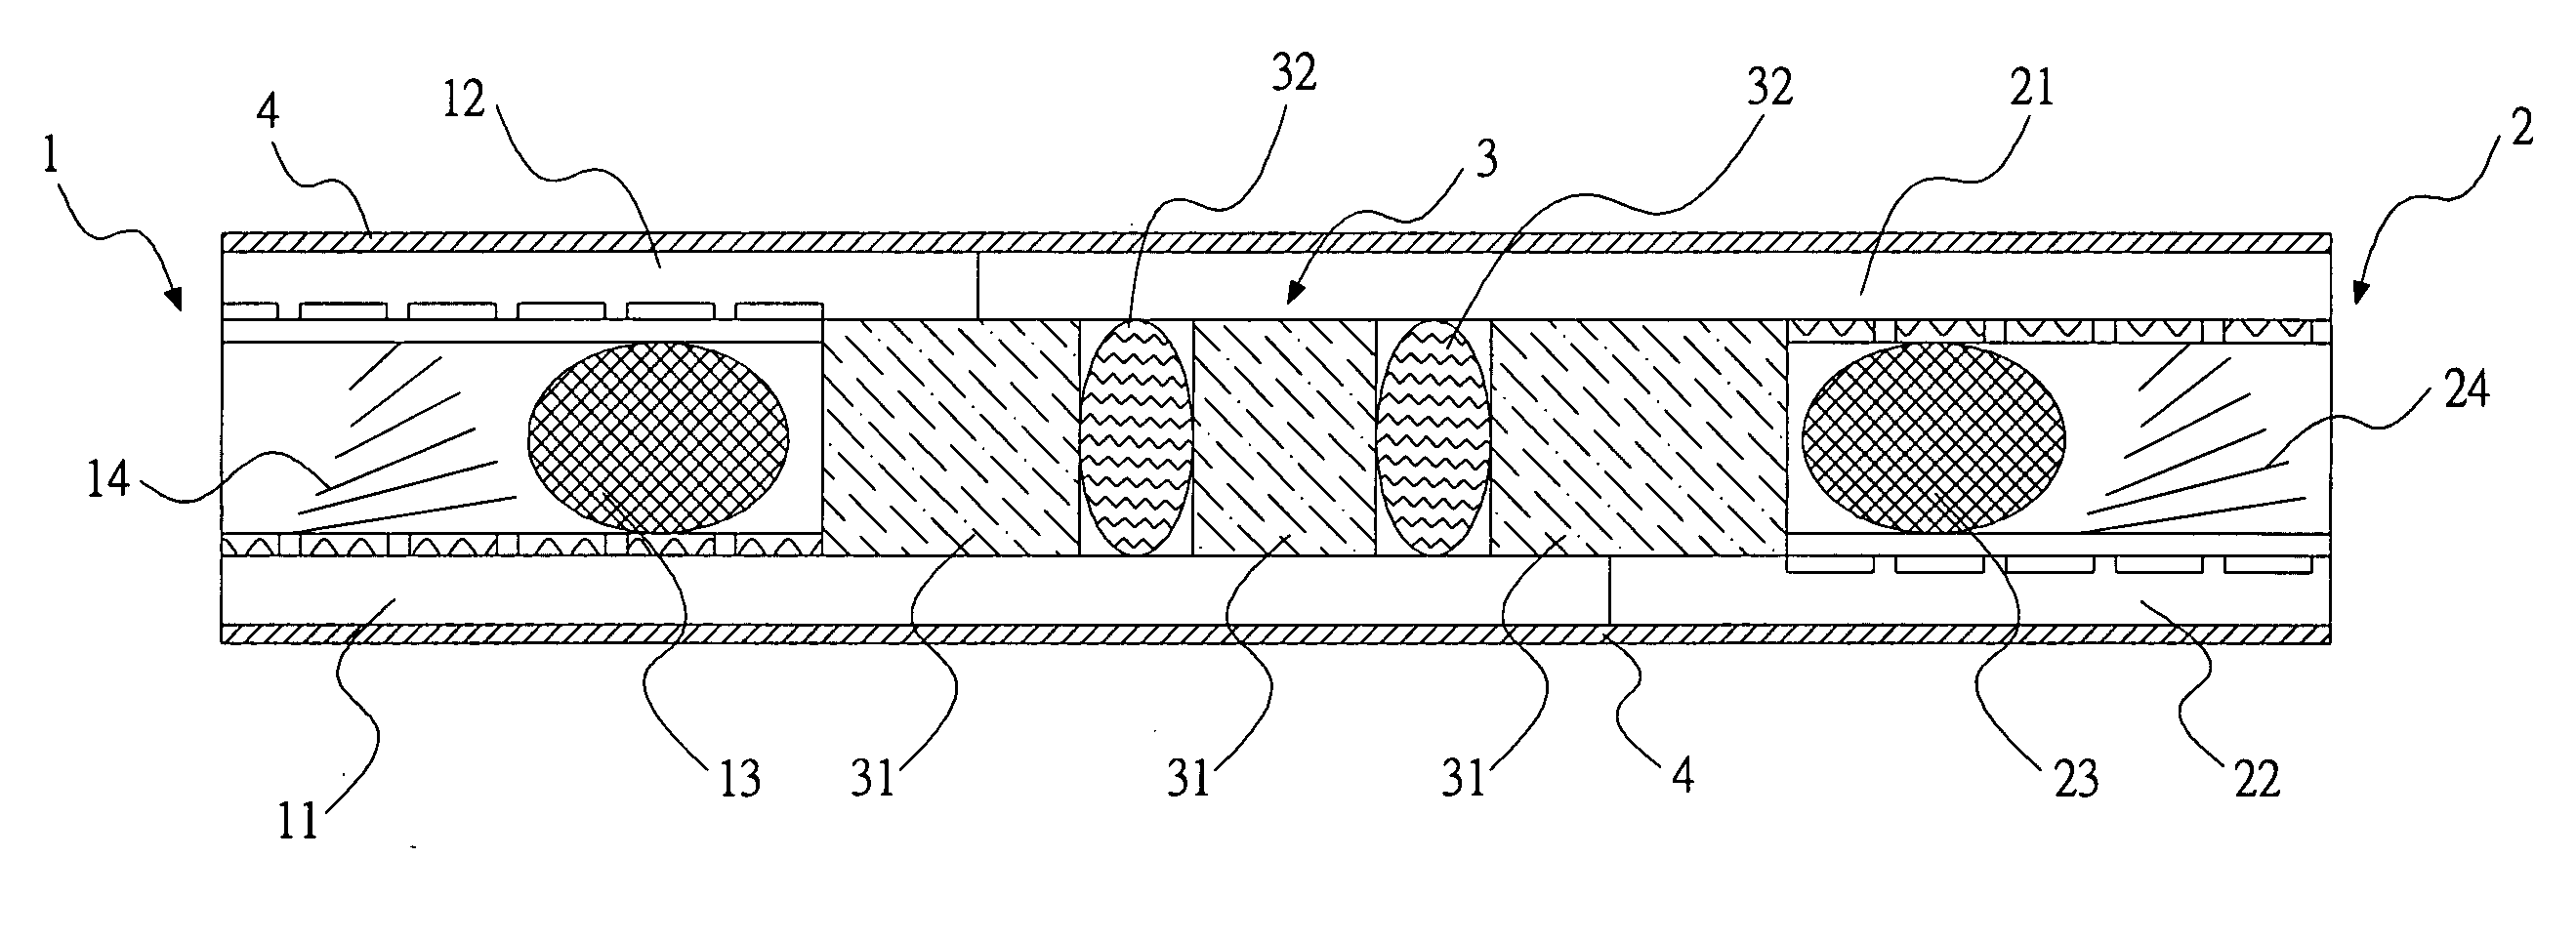 Large-scale display device